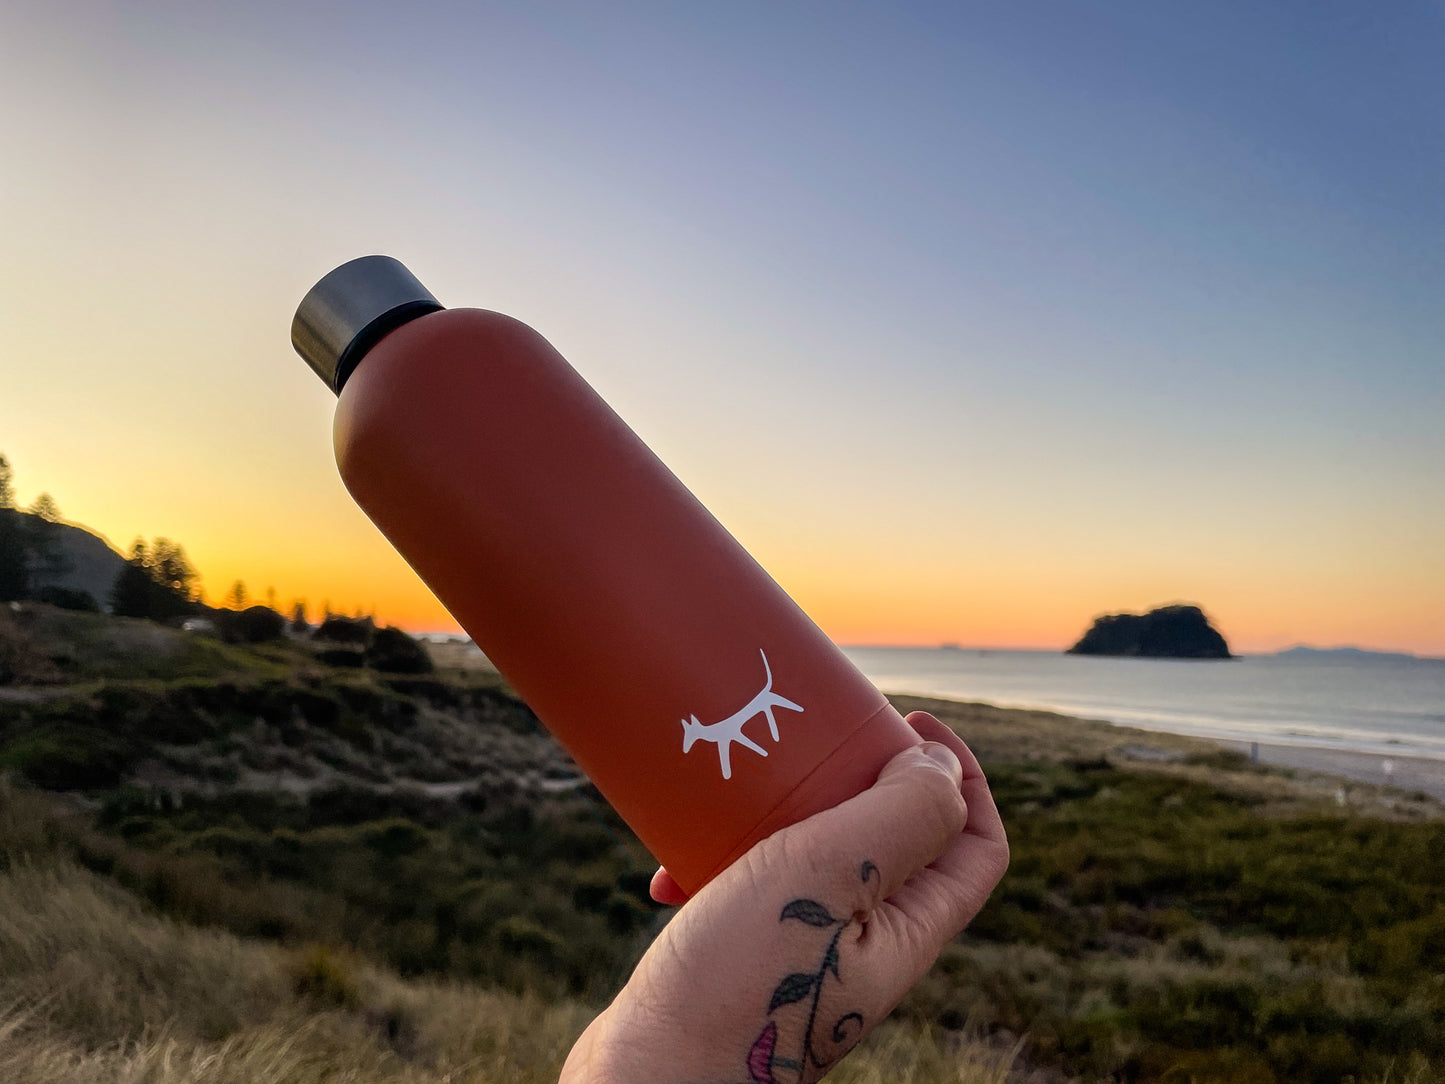 Female hand holding a stainless steel water bottle in rust colour with cream Droggo logo on the front. Beachy sunset background.